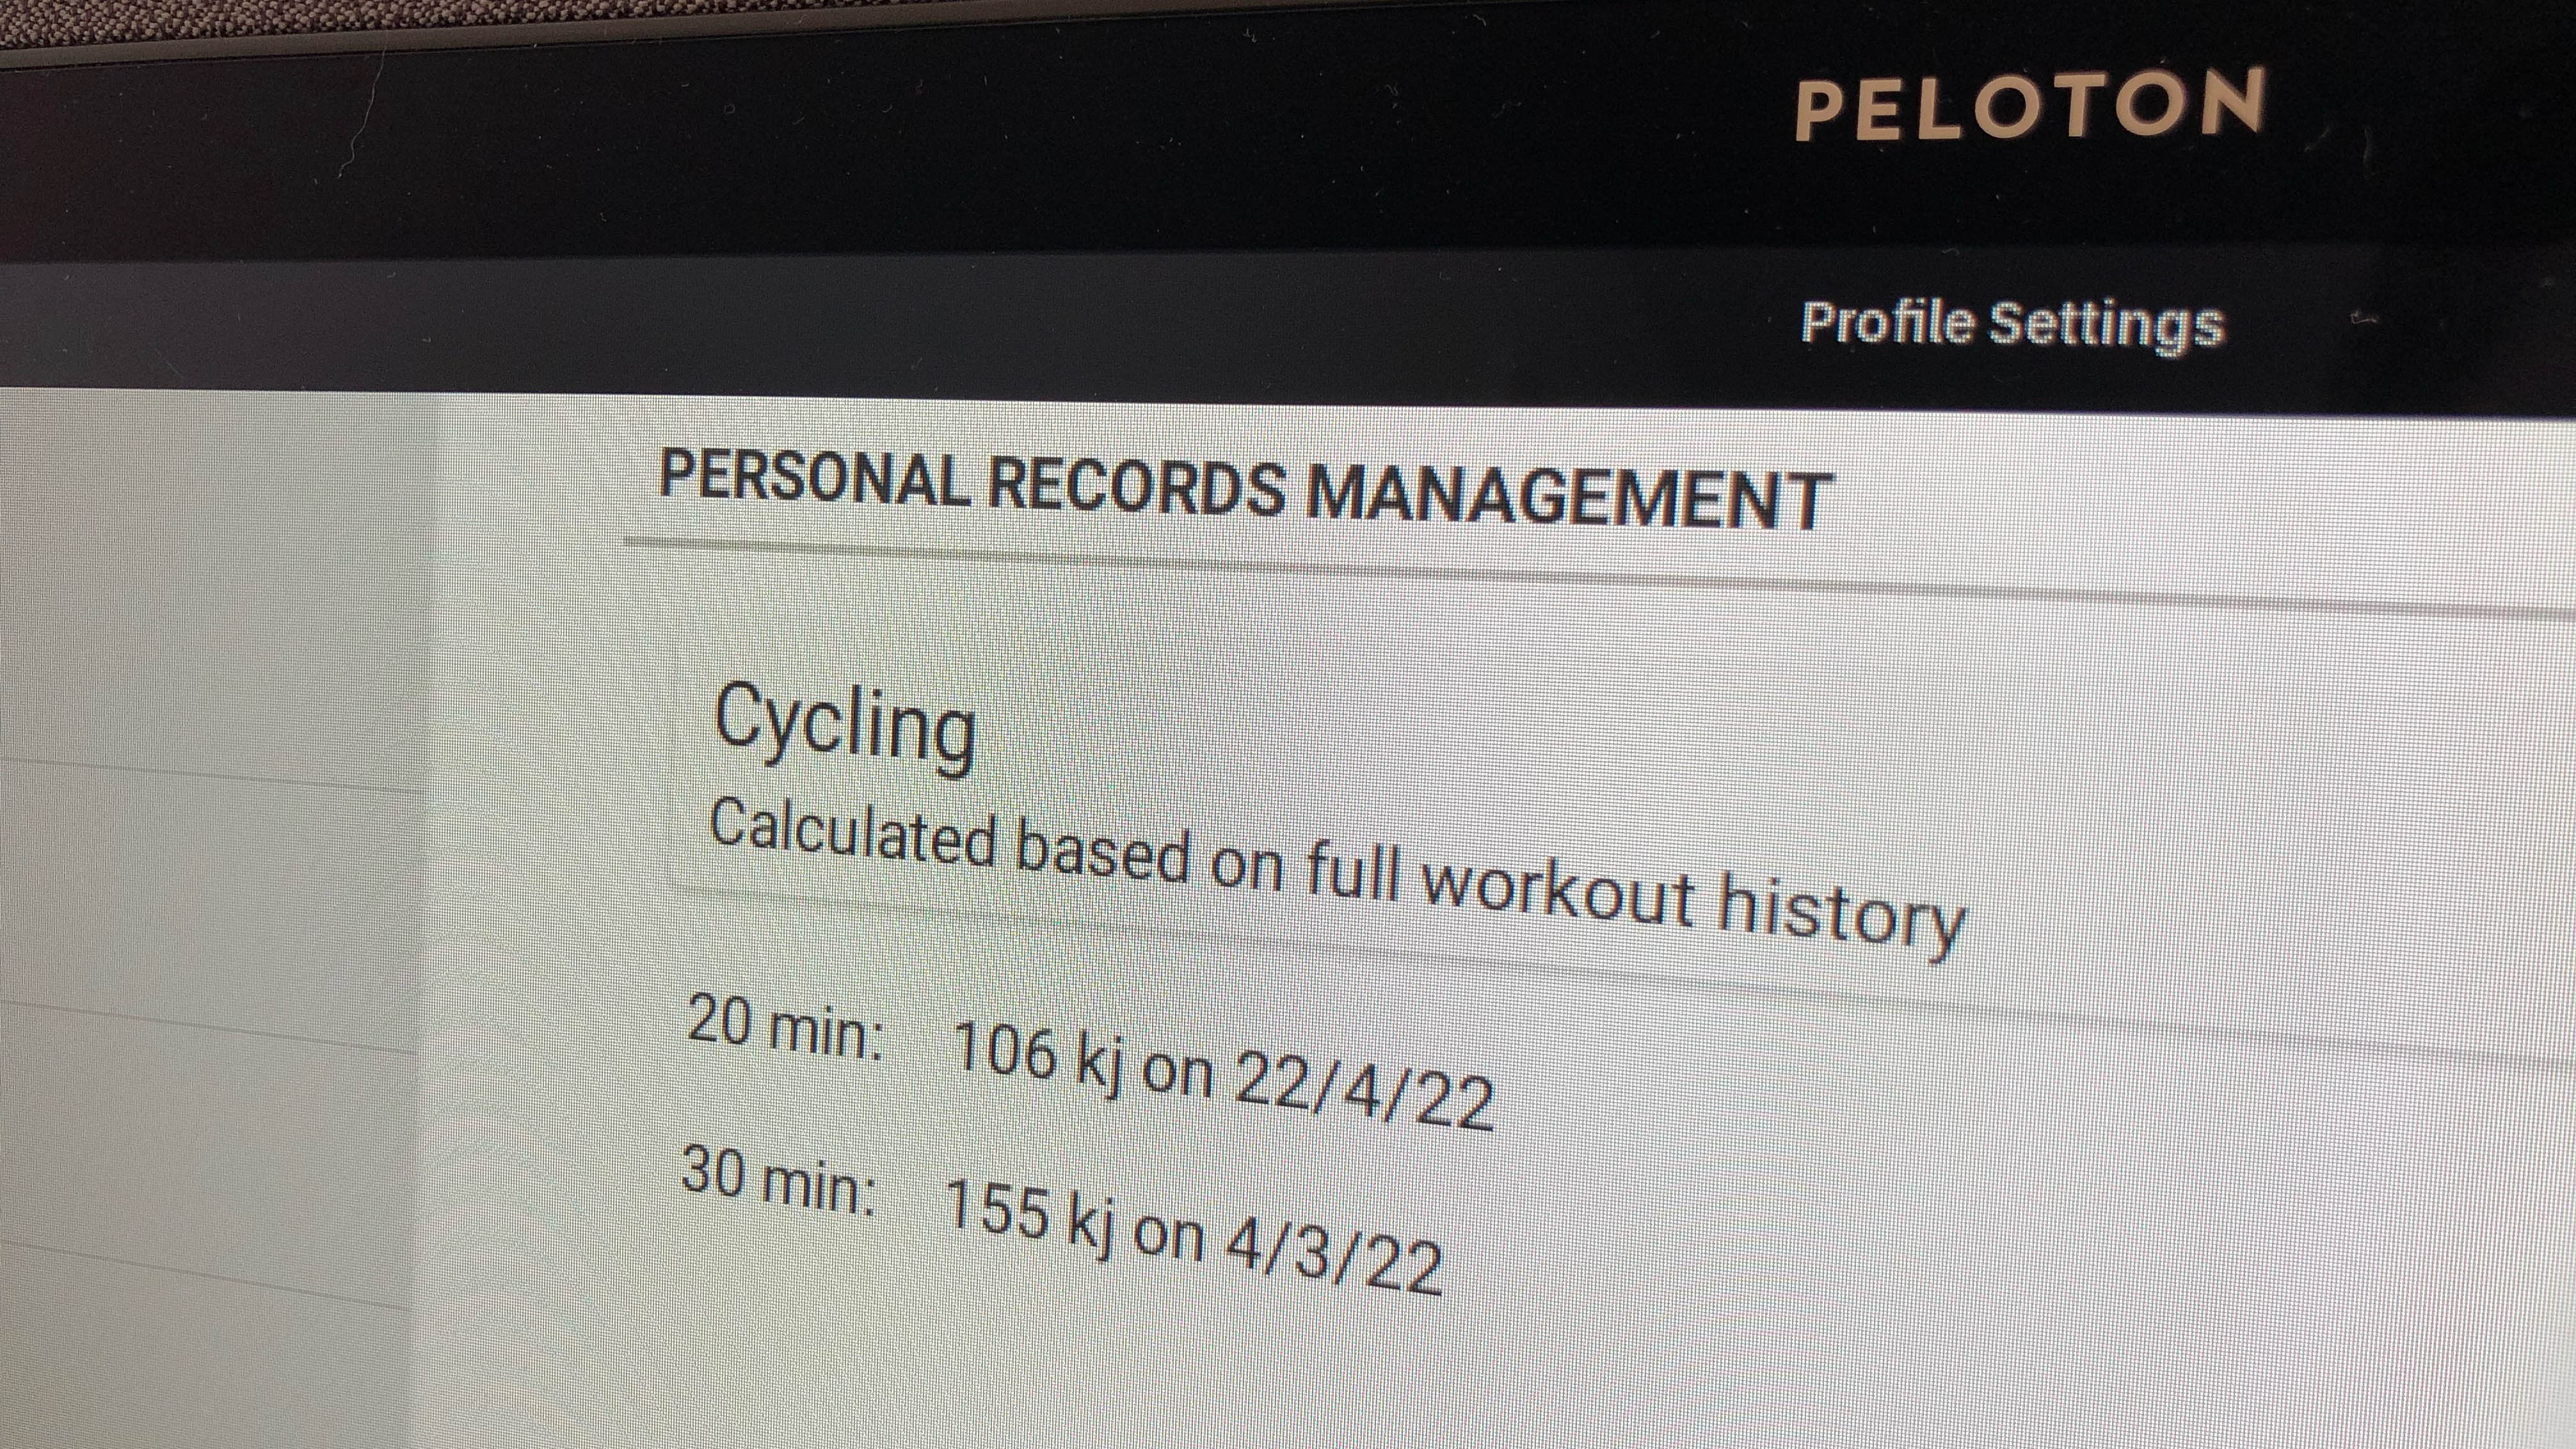 The personal records shown on the display of the Peloton Bike+